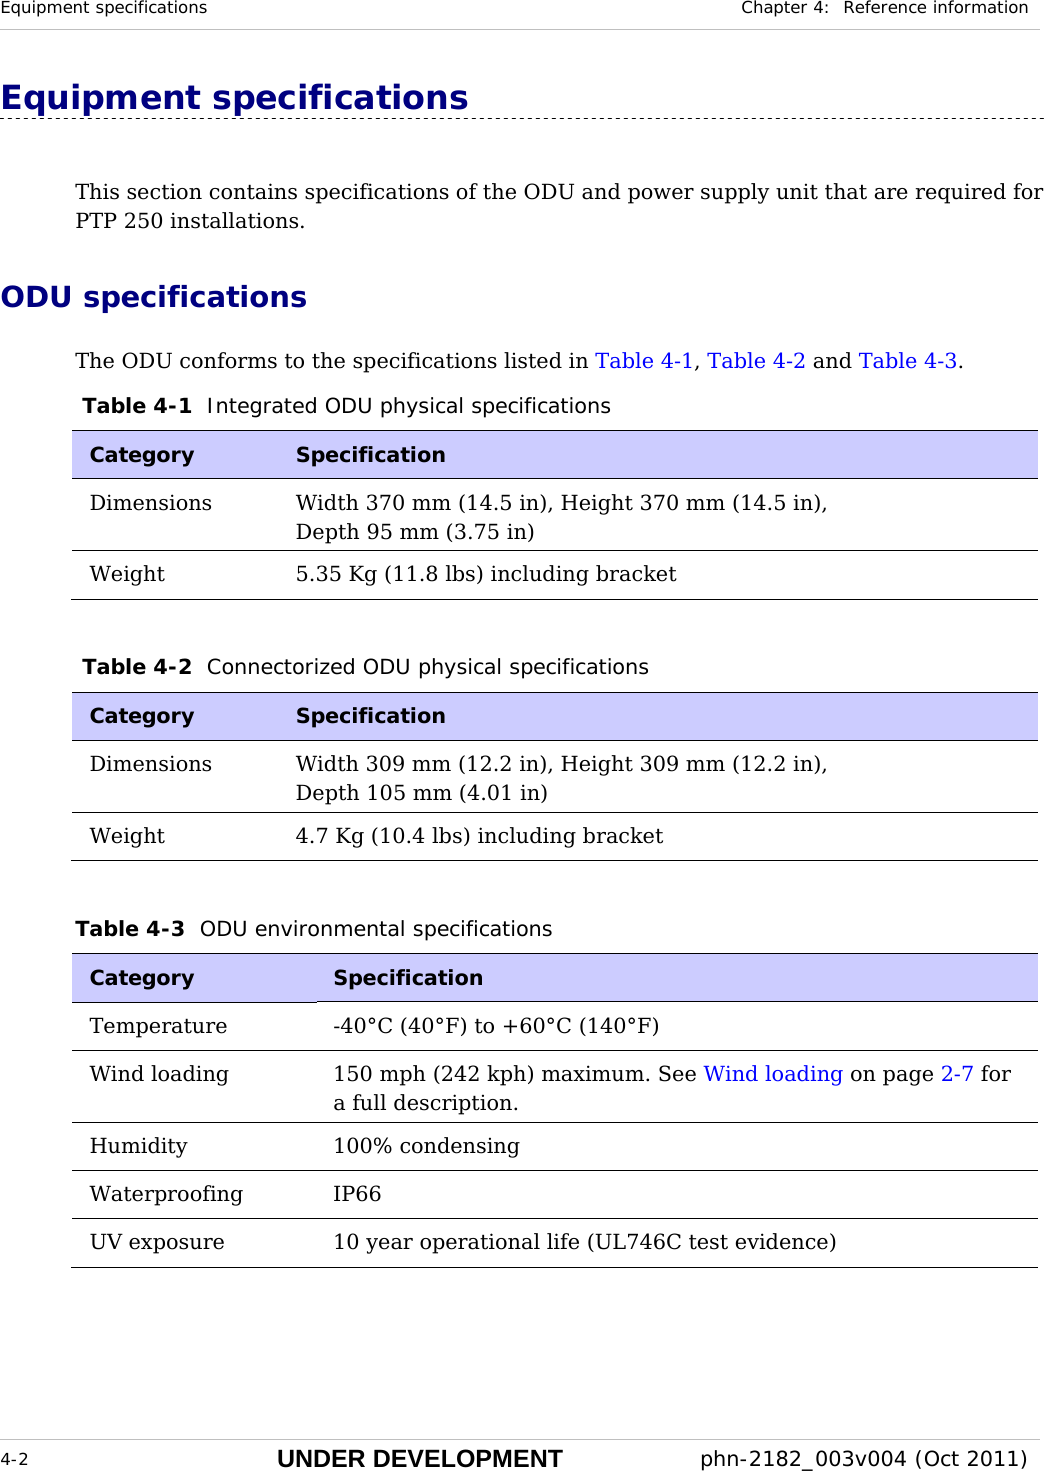 Equipment specifications  Chapter 4:  Reference information  4-2 UNDER DEVELOPMENT  phn-2182_003v004 (Oct 2011)  Equipment specifications This section contains specifications of the ODU and power supply unit that are required for PTP 250 installations. ODU specifications The ODU conforms to the specifications listed in Table 4-1, Table 4-2 and Table 4-3.  Table 4-1  Integrated ODU physical specifications Category  Specification Dimensions   Width 370 mm (14.5 in), Height 370 mm (14.5 in),  Depth 95 mm (3.75 in)  Weight   5.35 Kg (11.8 lbs) including bracket    Table 4-2  Connectorized ODU physical specifications Category  Specification Dimensions   Width 309 mm (12.2 in), Height 309 mm (12.2 in),  Depth 105 mm (4.01 in)  Weight   4.7 Kg (10.4 lbs) including bracket    Table 4-3  ODU environmental specifications Category  Specification Temperature   -40°C (40°F) to +60°C (140°F) Wind loading   150 mph (242 kph) maximum. See Wind loading on page 2-7 for a full description. Humidity   100% condensing Waterproofing IP66 UV exposure   10 year operational life (UL746C test evidence)   